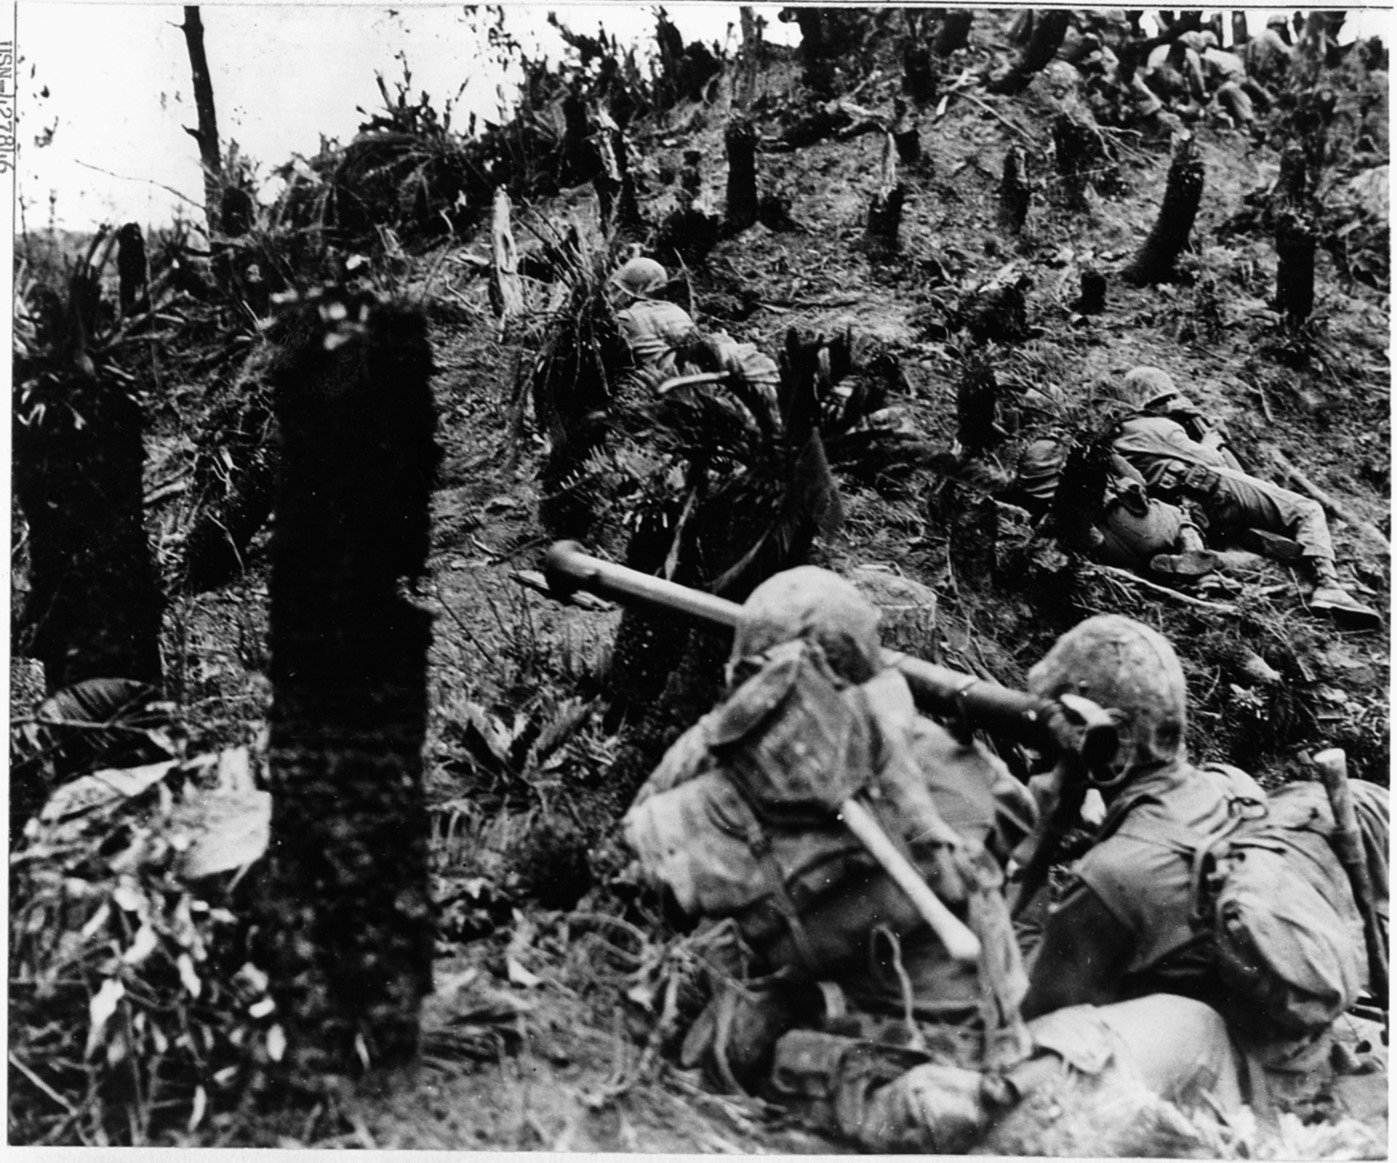 Marines inch their way up a battle-scarred hillside during heavy fighting on the southern end of Okinawa.